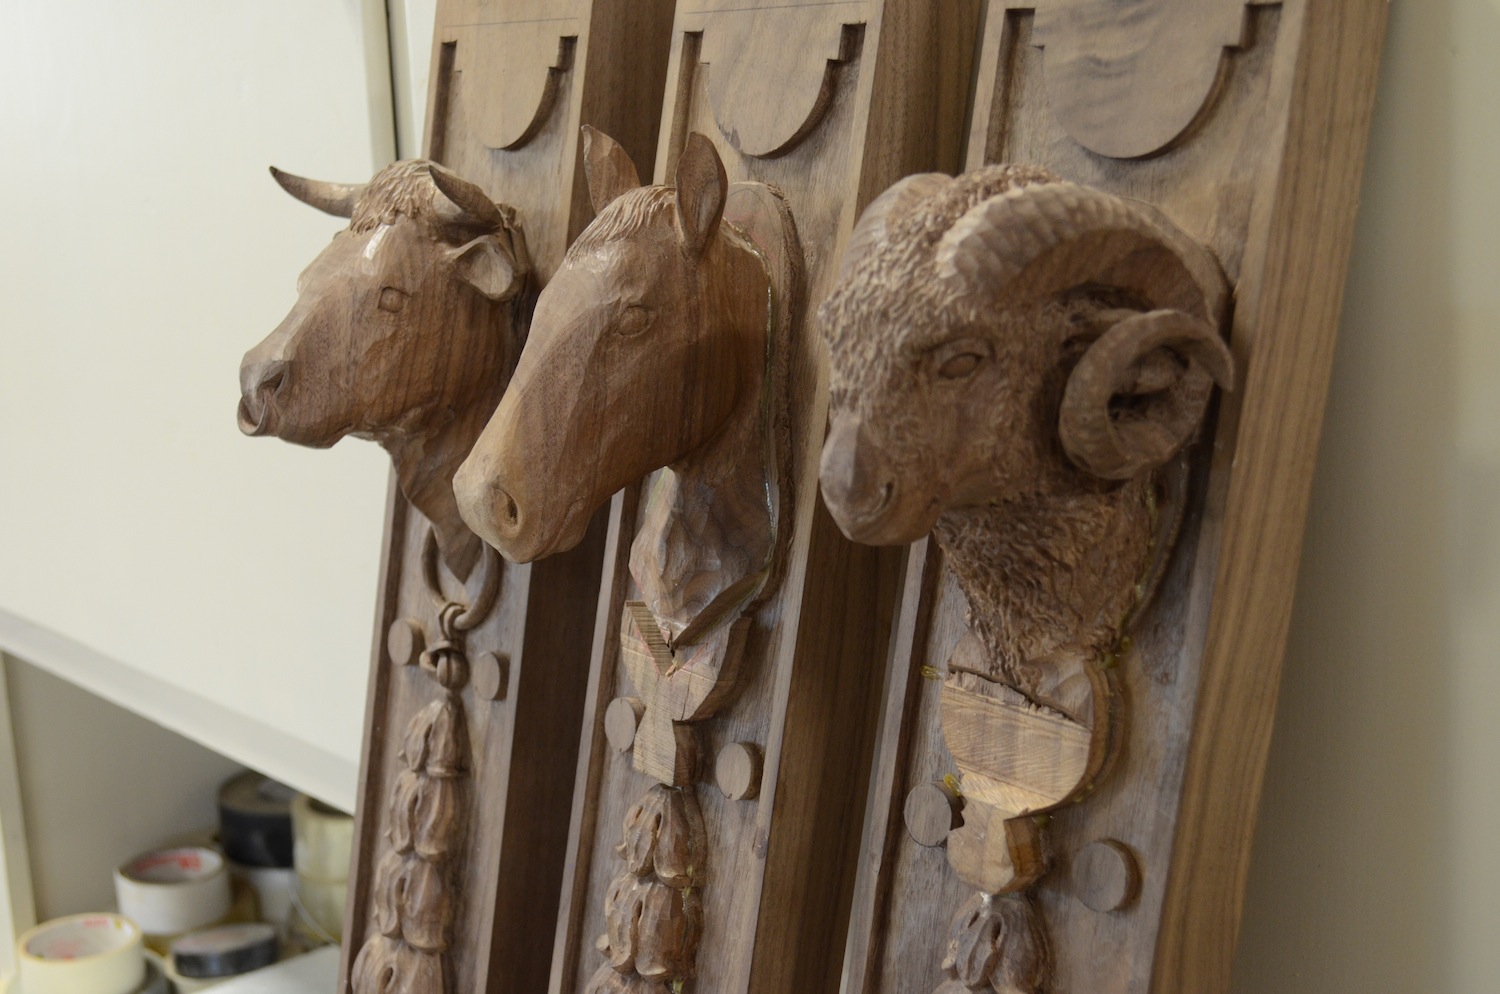   The heads nearing completion.&nbsp; Note the ring under the bull's neck.  